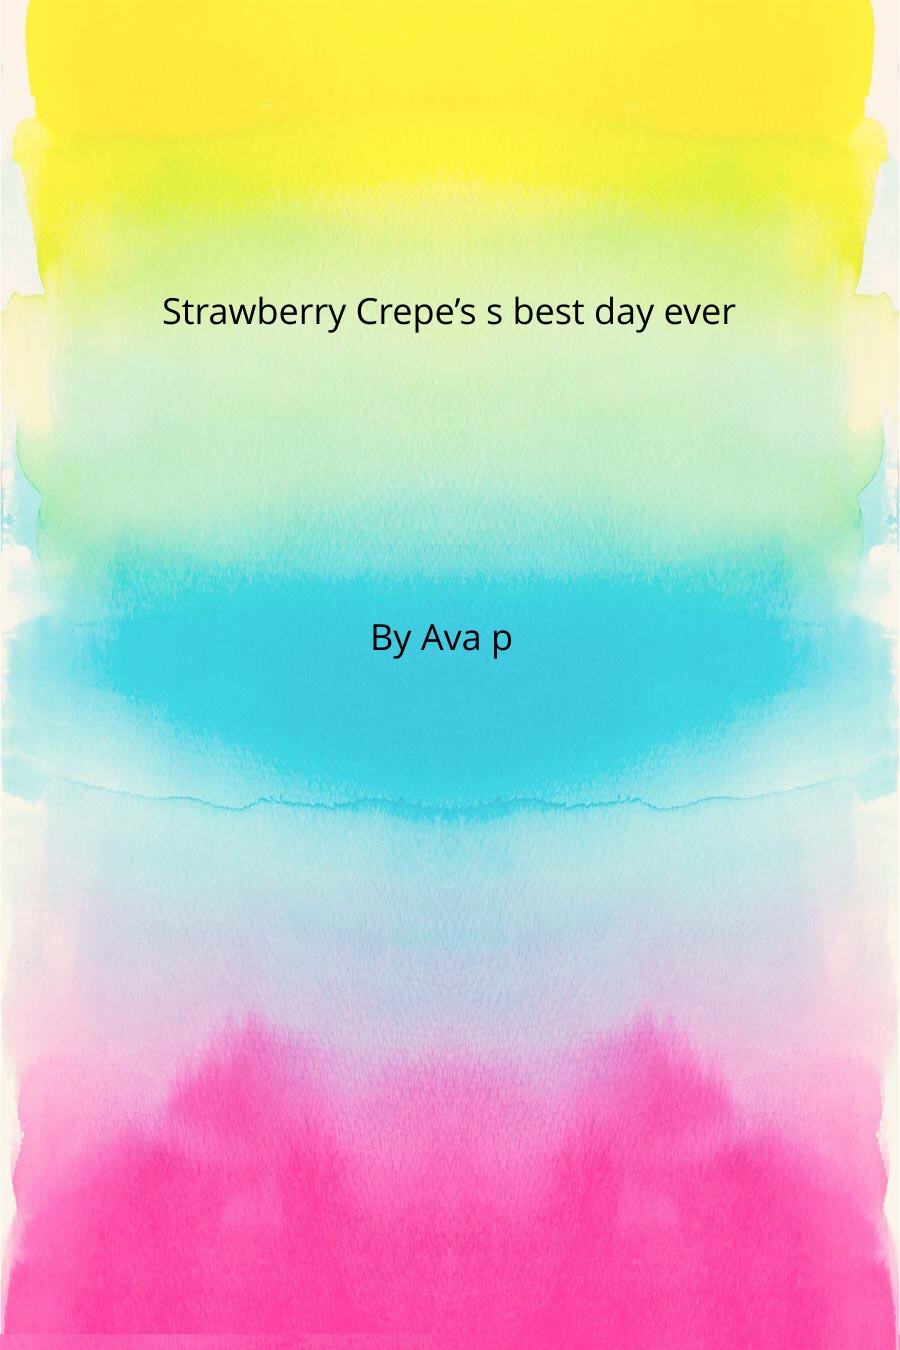 Strawberry Crepe’s Best Day Ever by Ava P